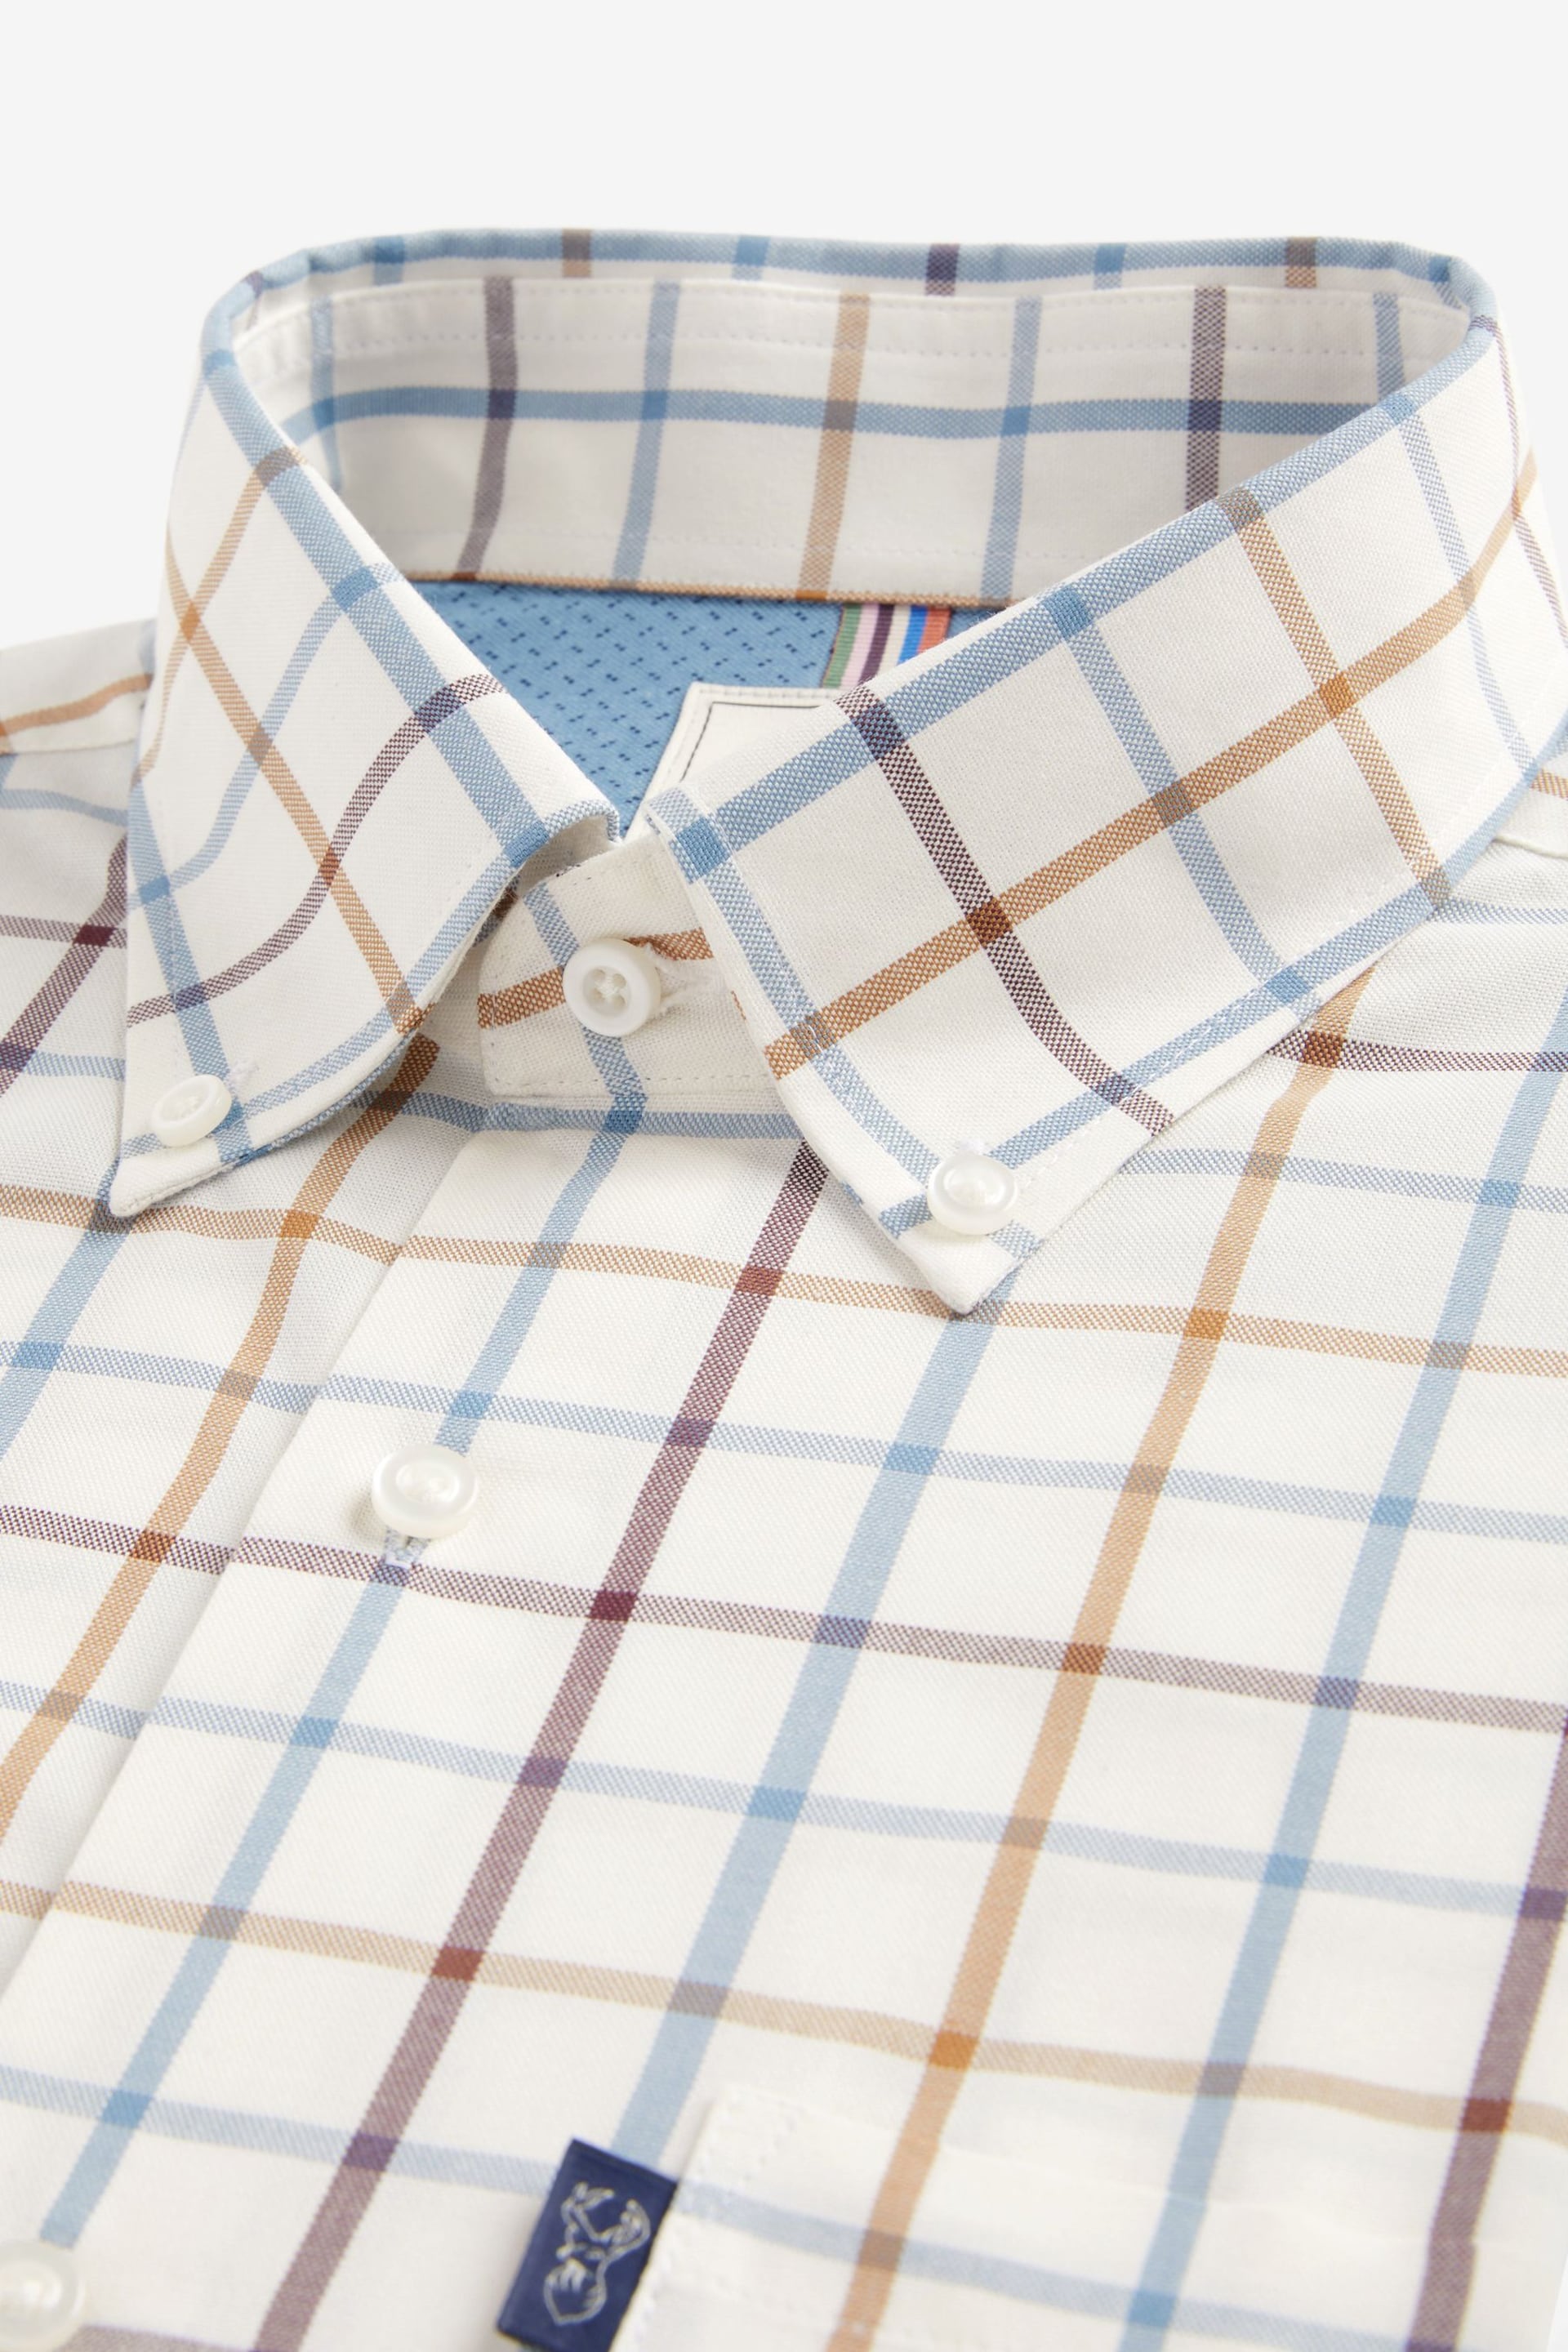 Cream/Blue Tattersall Check Easy Iron Button Down Oxford Shirt - Image 5 of 6